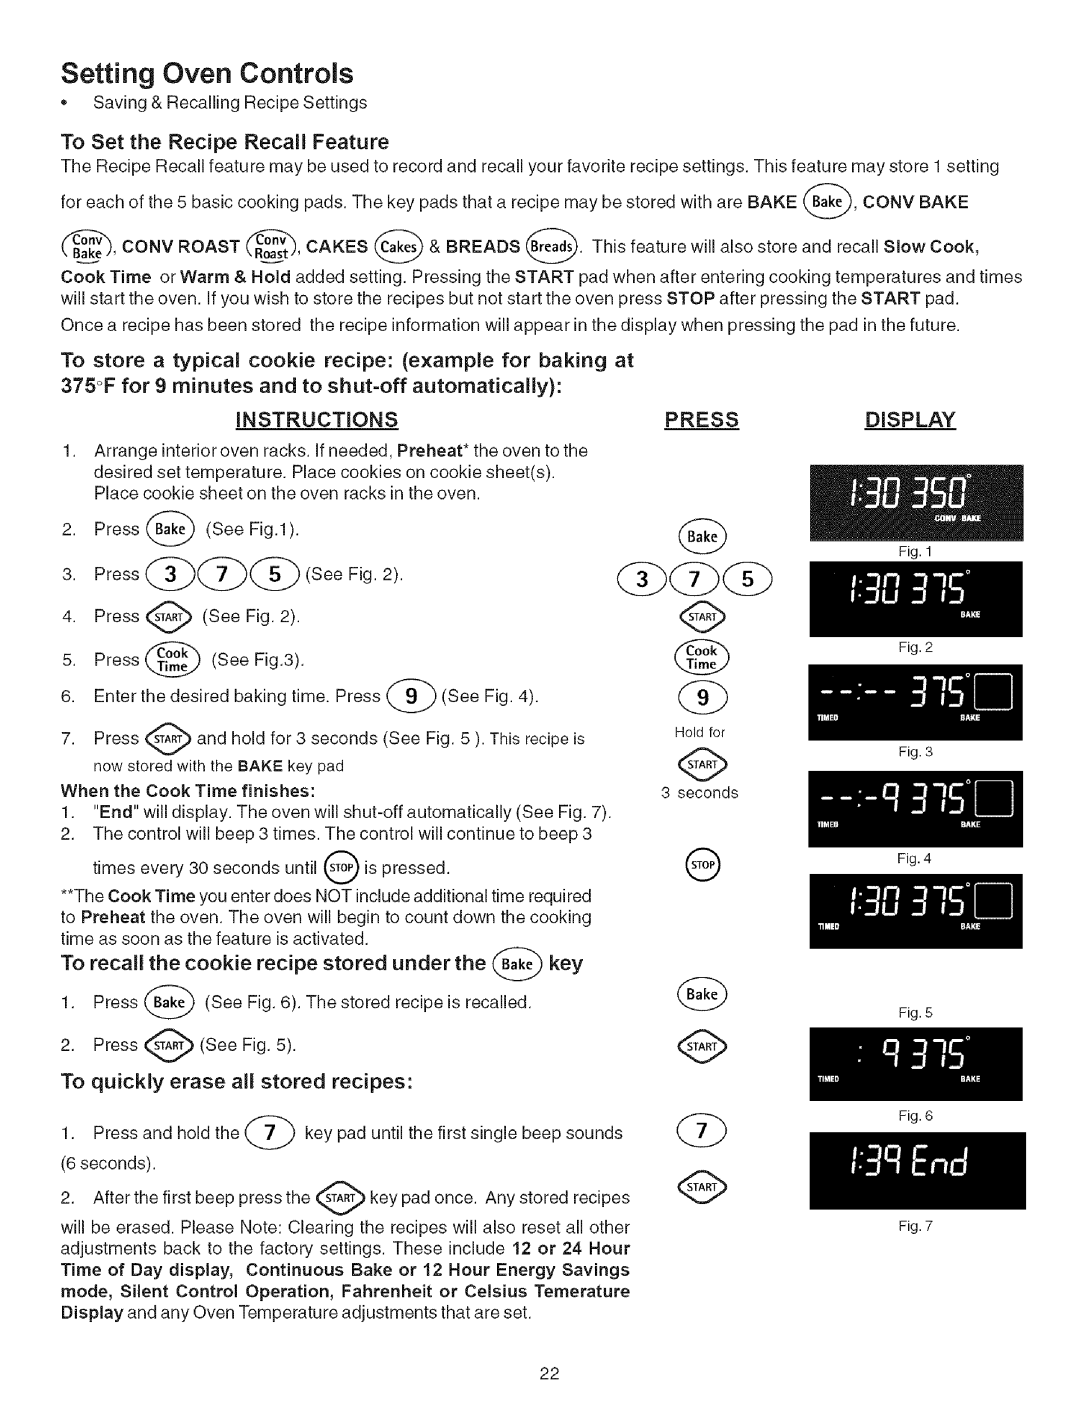 Kenmore 790.9659 manual Setting Oven Controls, To Set the Recipe Recall Feature, Instructions, Pressdisplay 